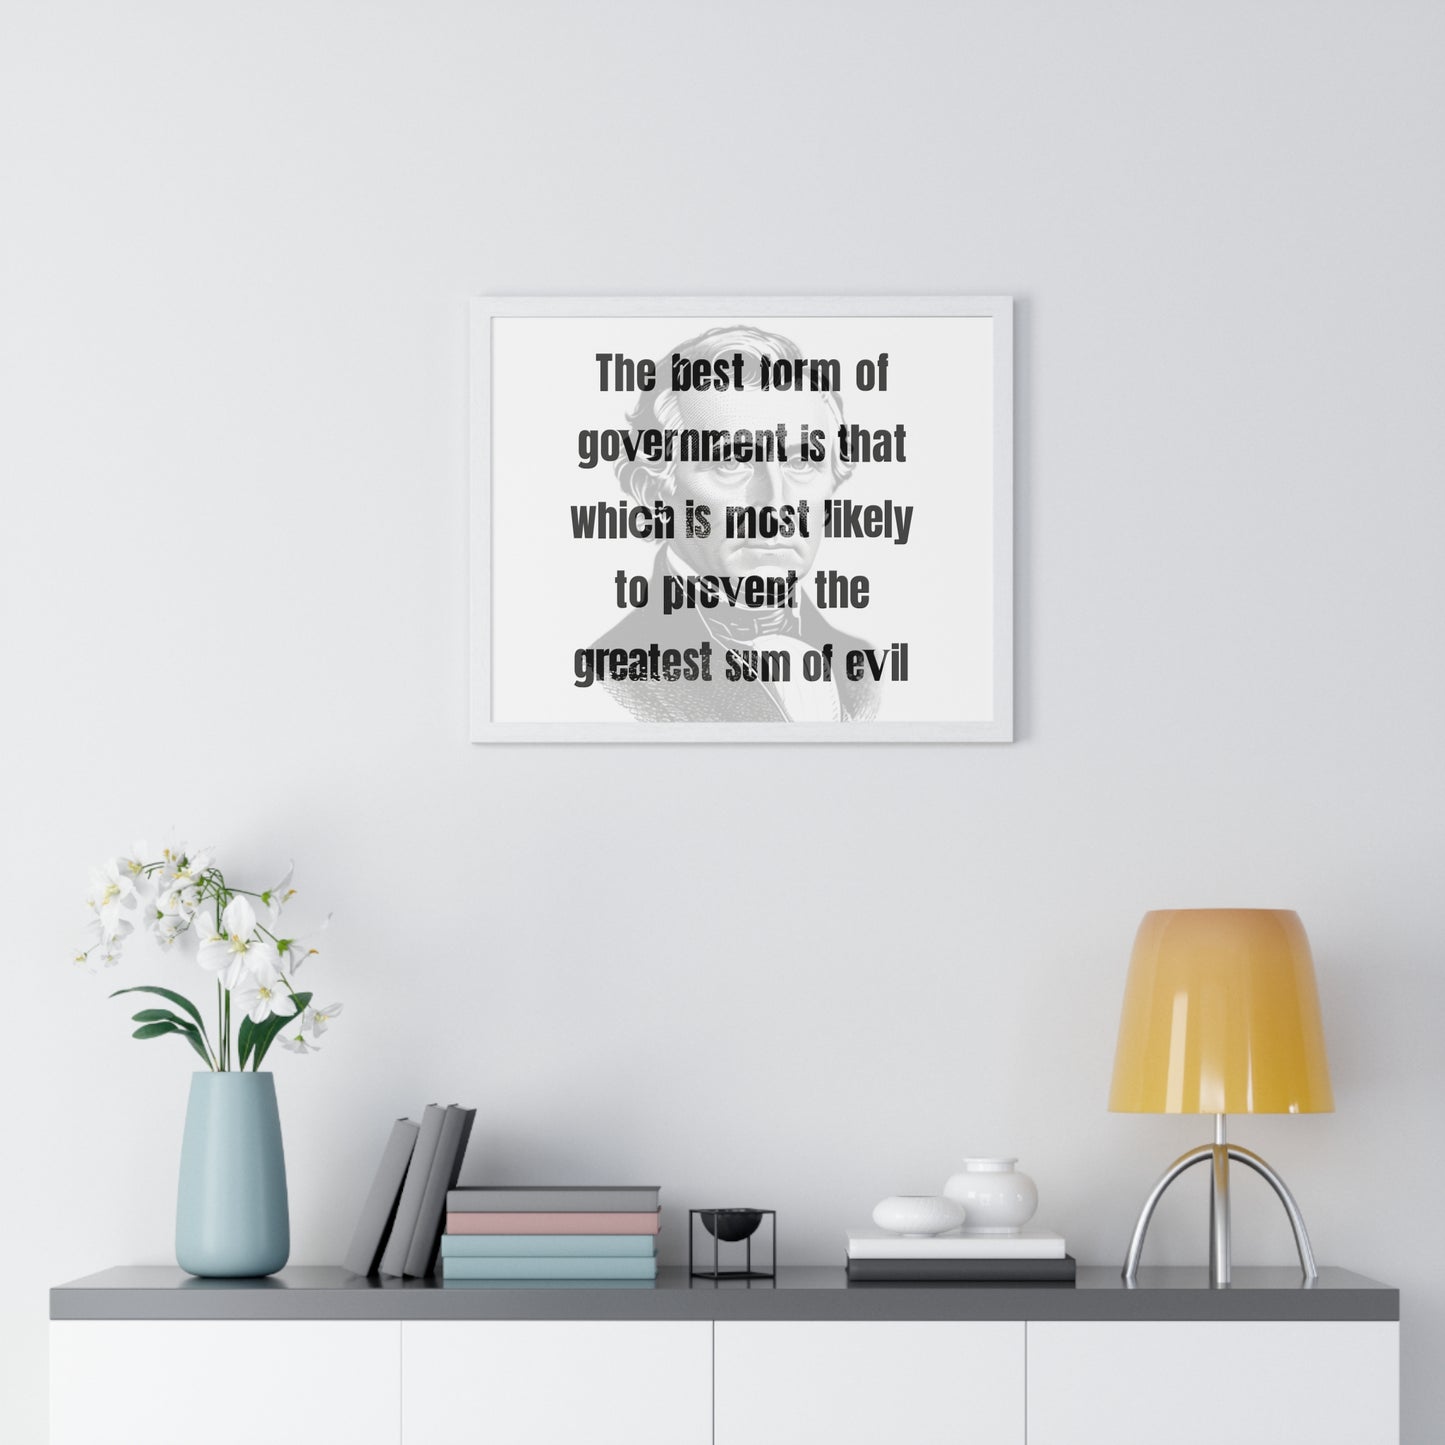 James Monroe Quote 3, Poster Art, Horizontal Light Print, 5th President of the United States, American Patriots, AI Art, Political Art, Poster Prints, Presidential Portraits, Presidential Quotes, Inspirational Quotes